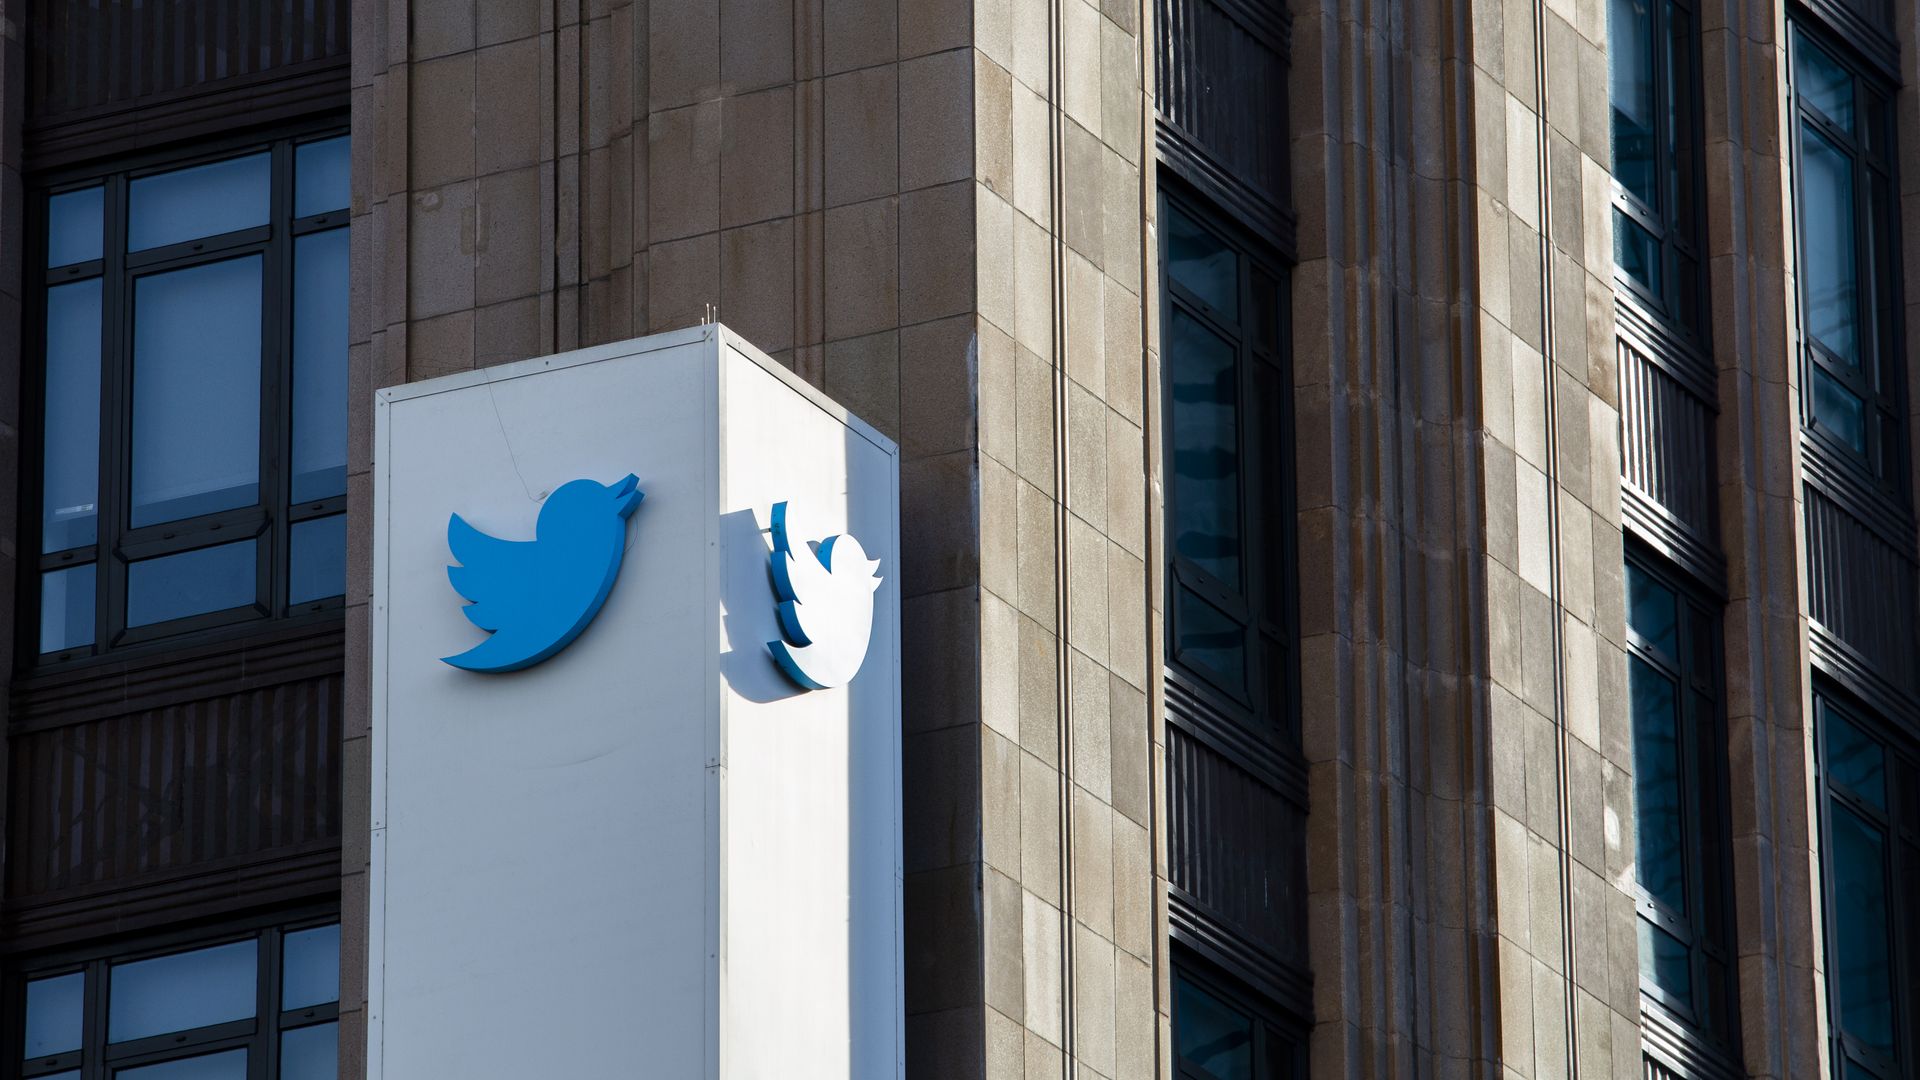 Photo of Twitter's blue bird logo on the exterior of a building